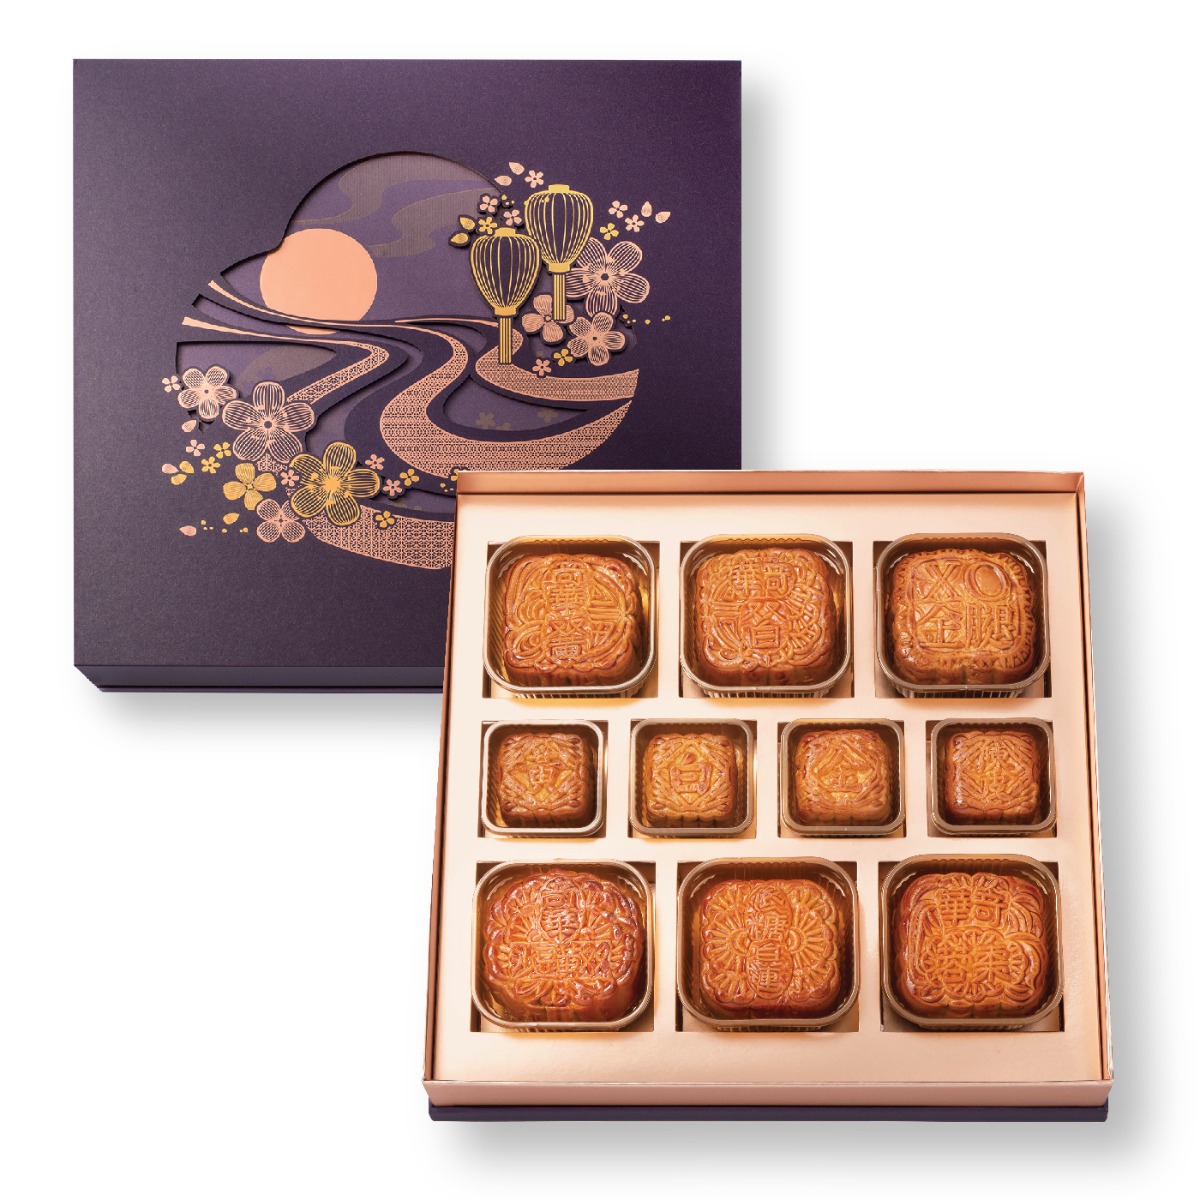 Kee Wah Bakery Four Kinds Assorted Gift Box Mooncakes 4pcs